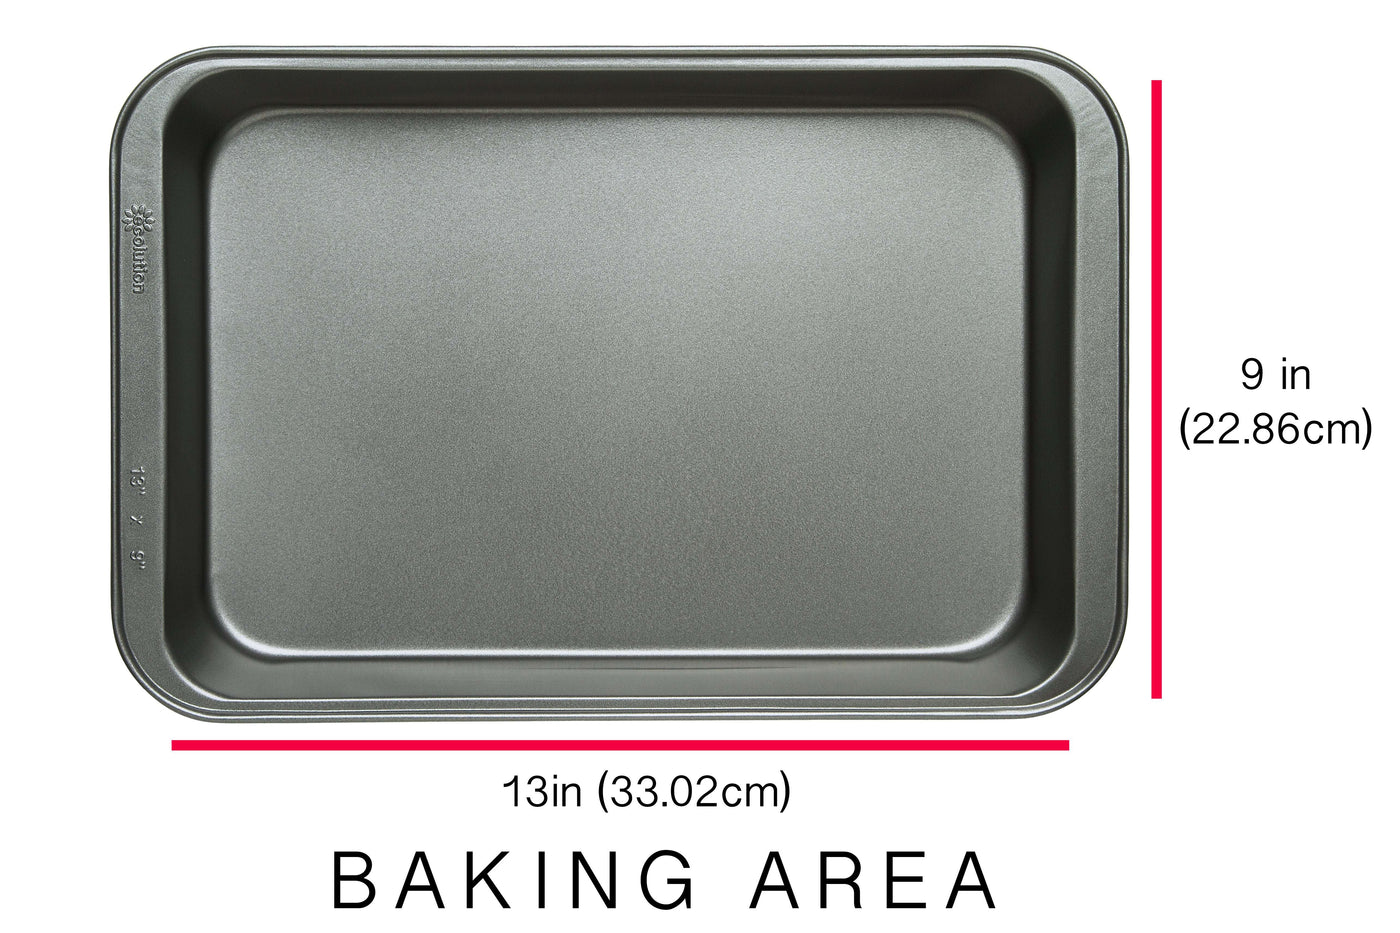 Ecolution Bakeins Large Loaf Pan - PFOA BPA and PTFE Free Non-Stick Coating - Heavy Duty Carbon Steel - Dishwasher Safe - Gray